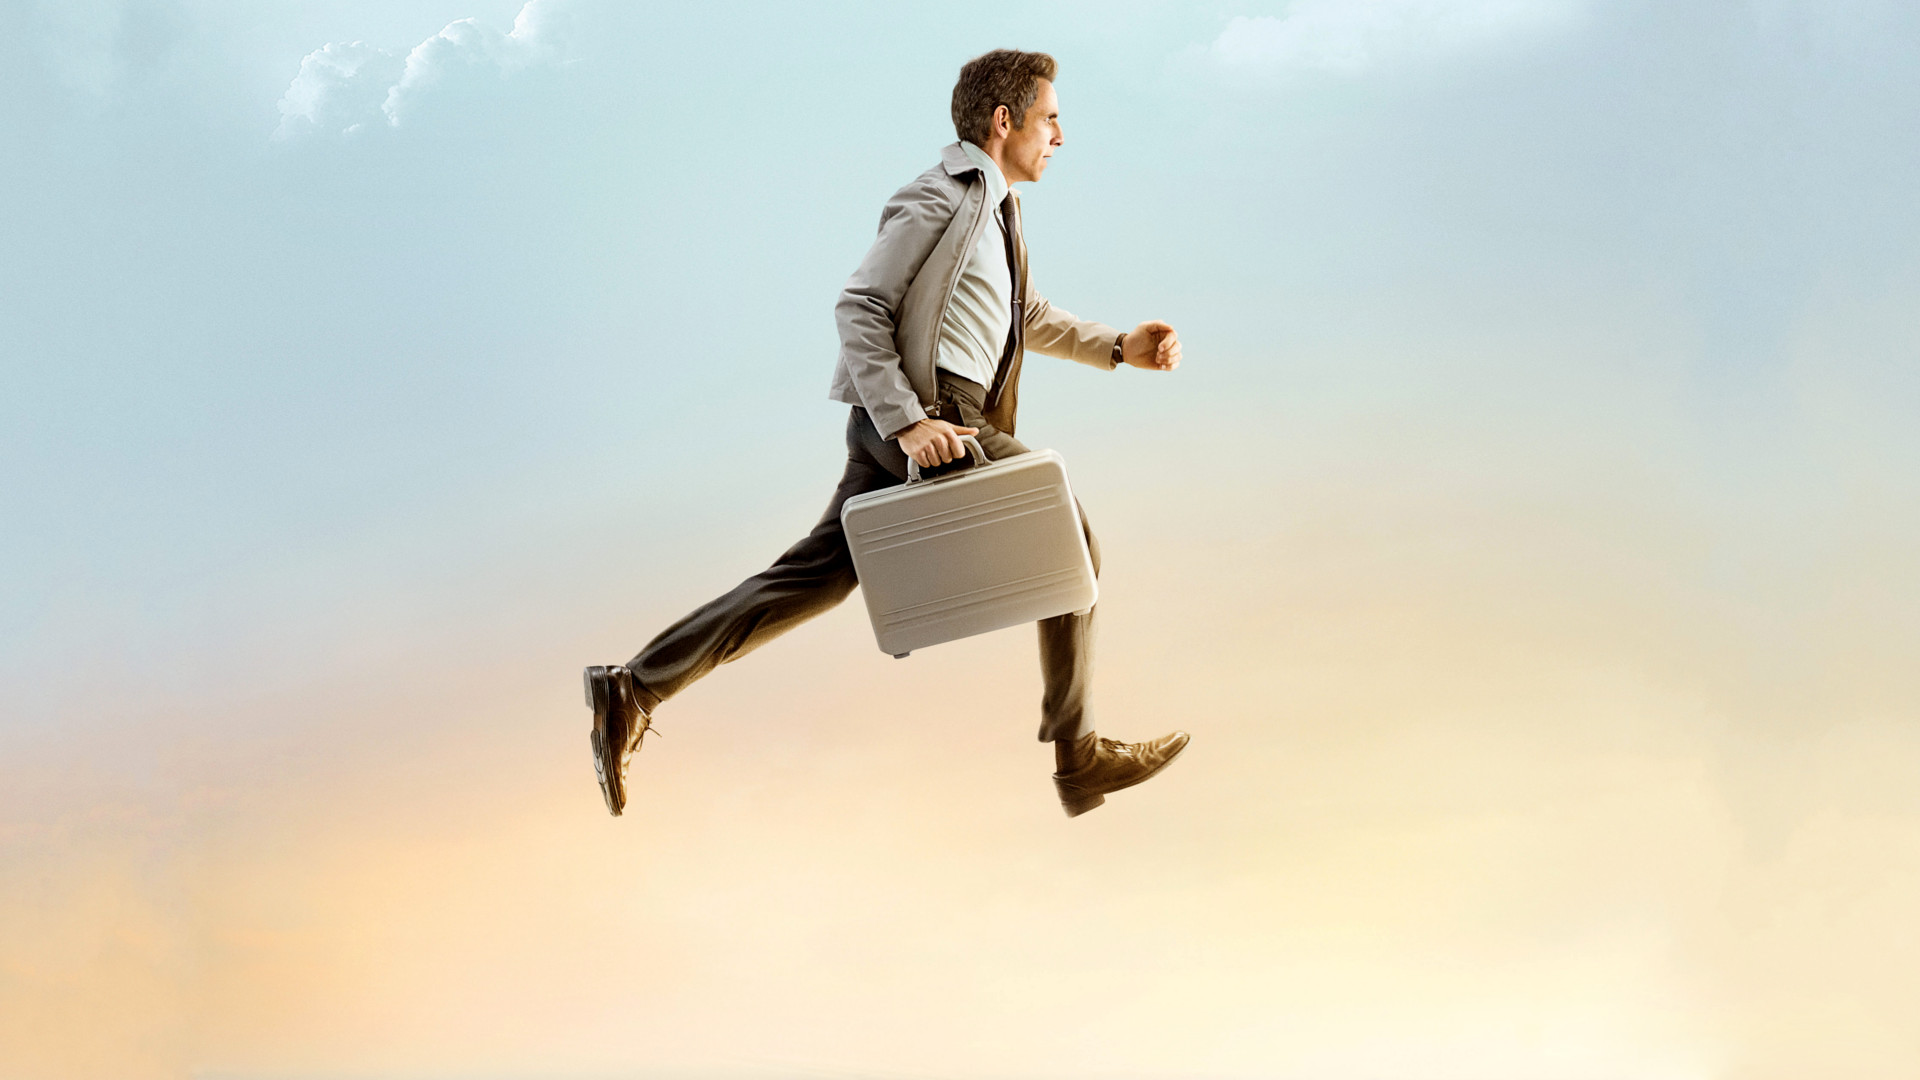 Movie The Secret Life Of Walter Mitty 1920x1080